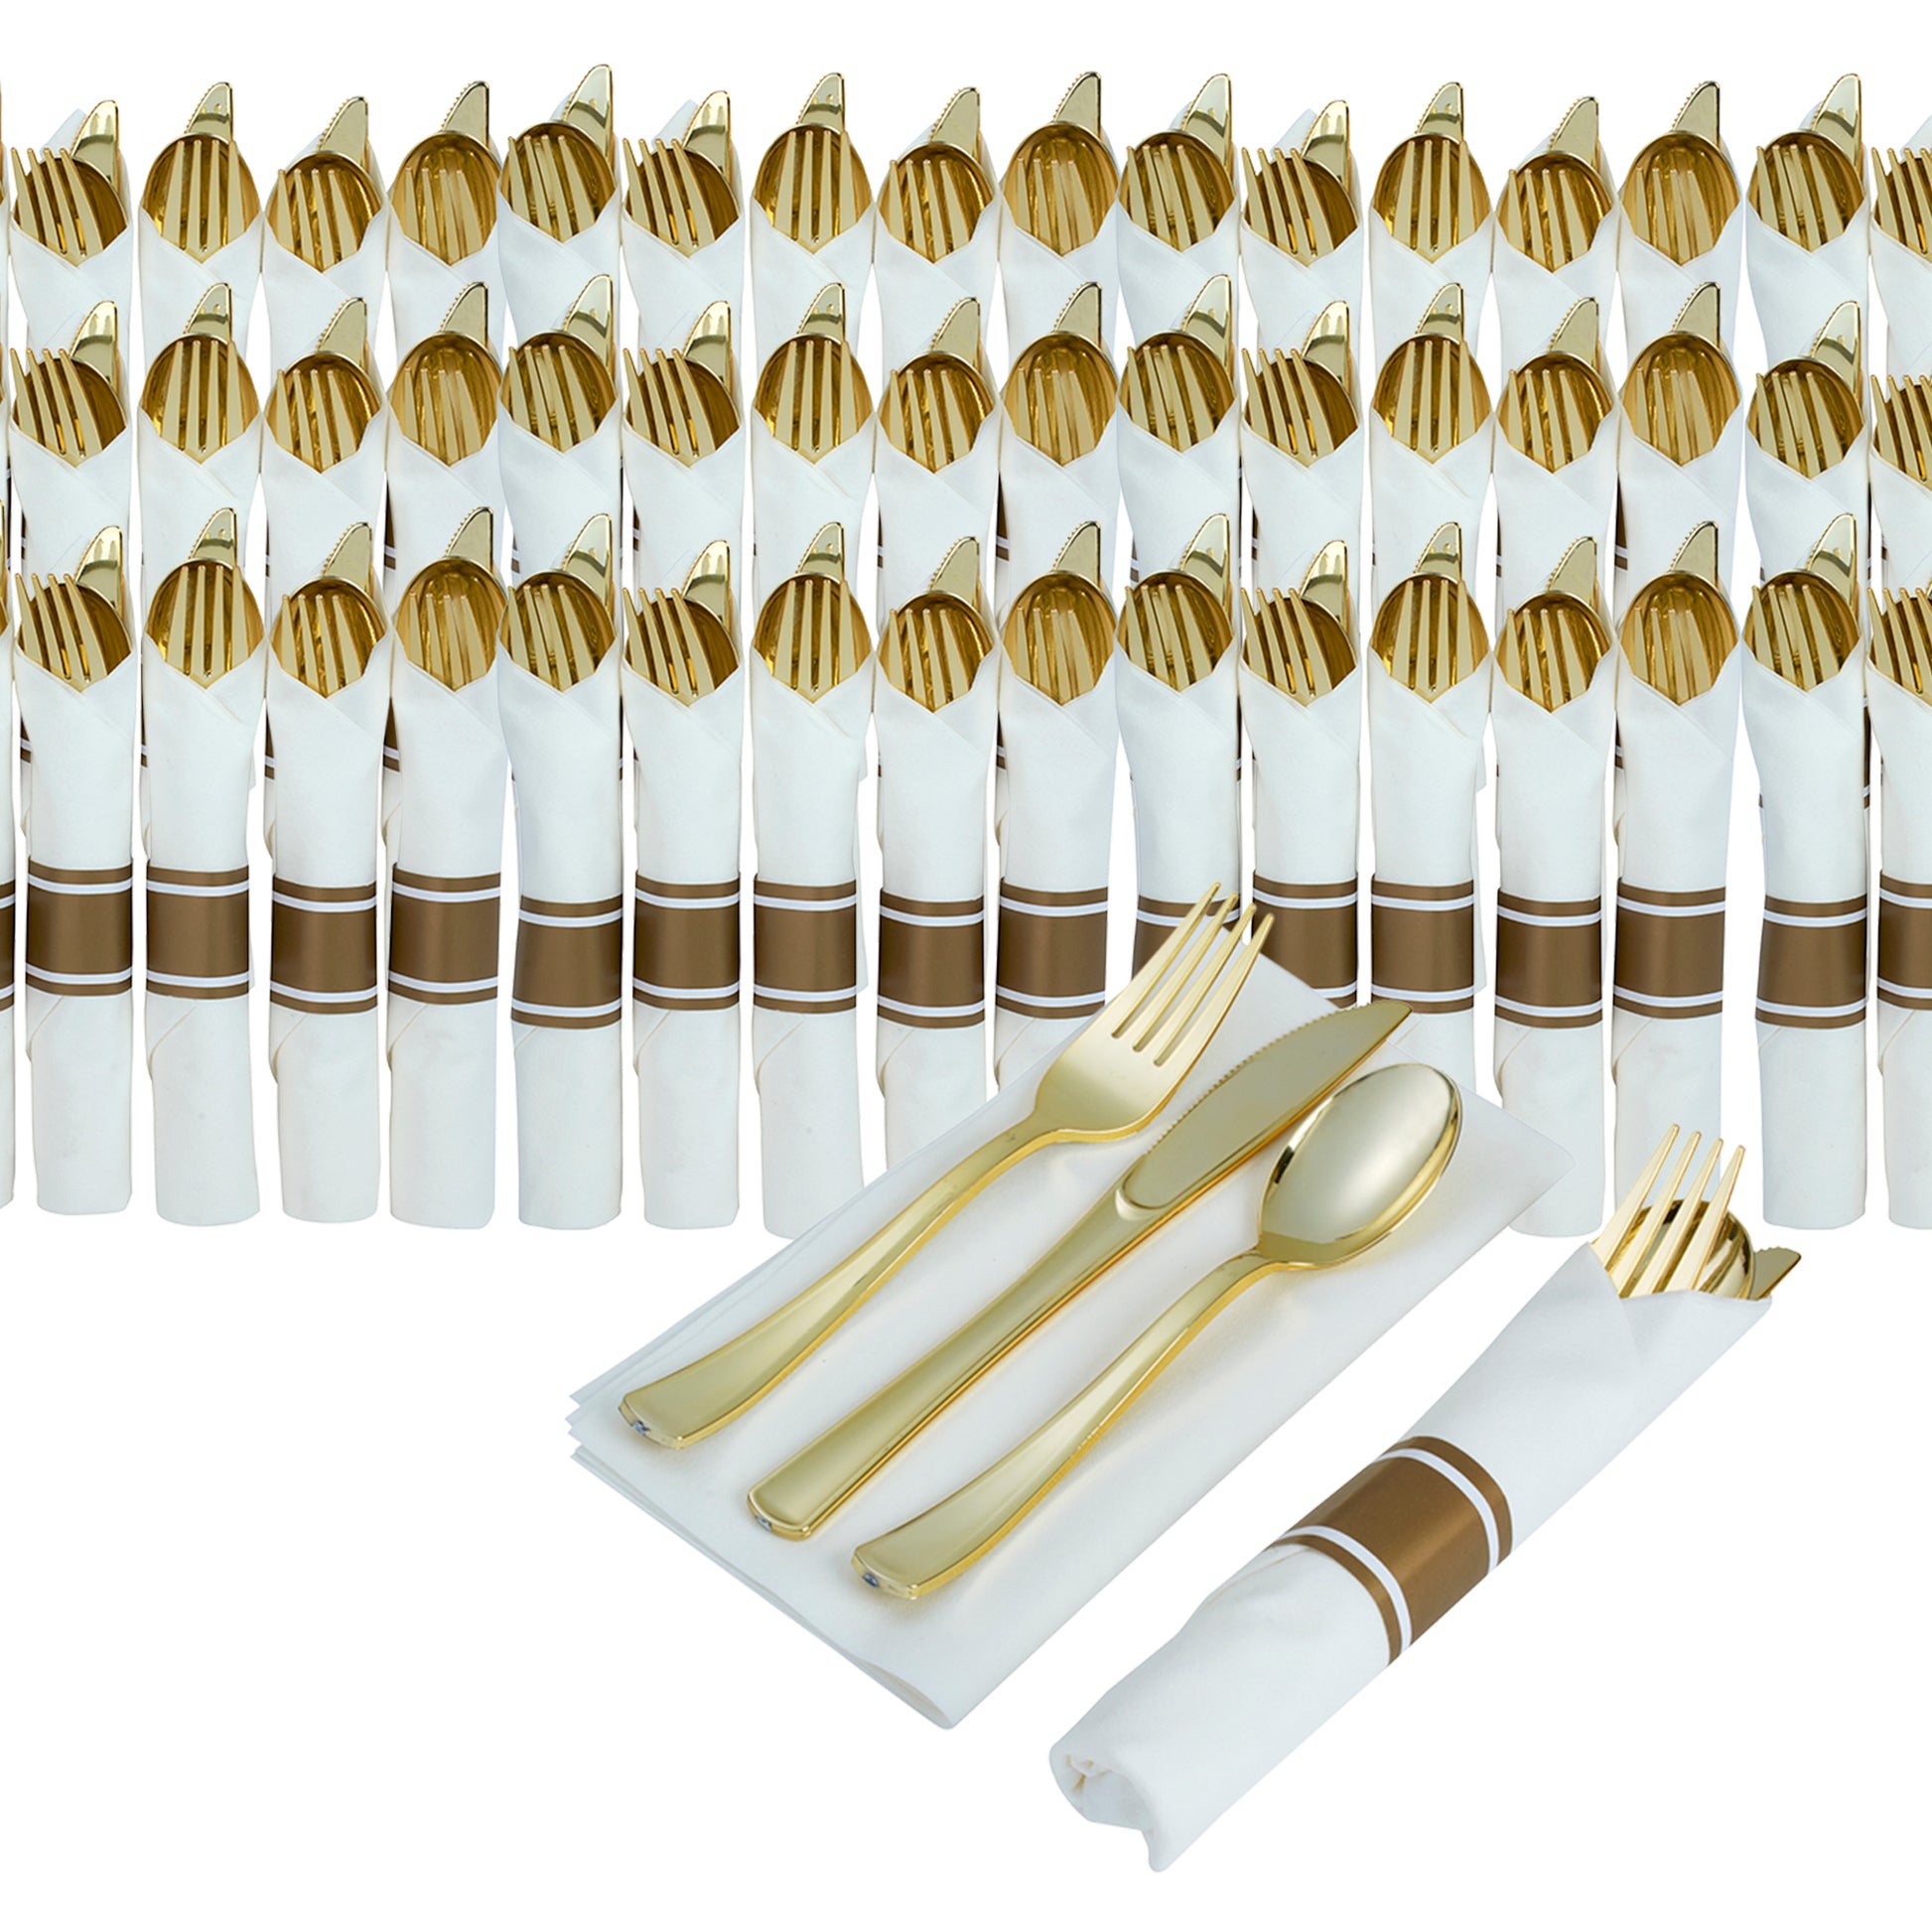 200 Piece Pre-rolled silver-colored plastic silverware set (for 50